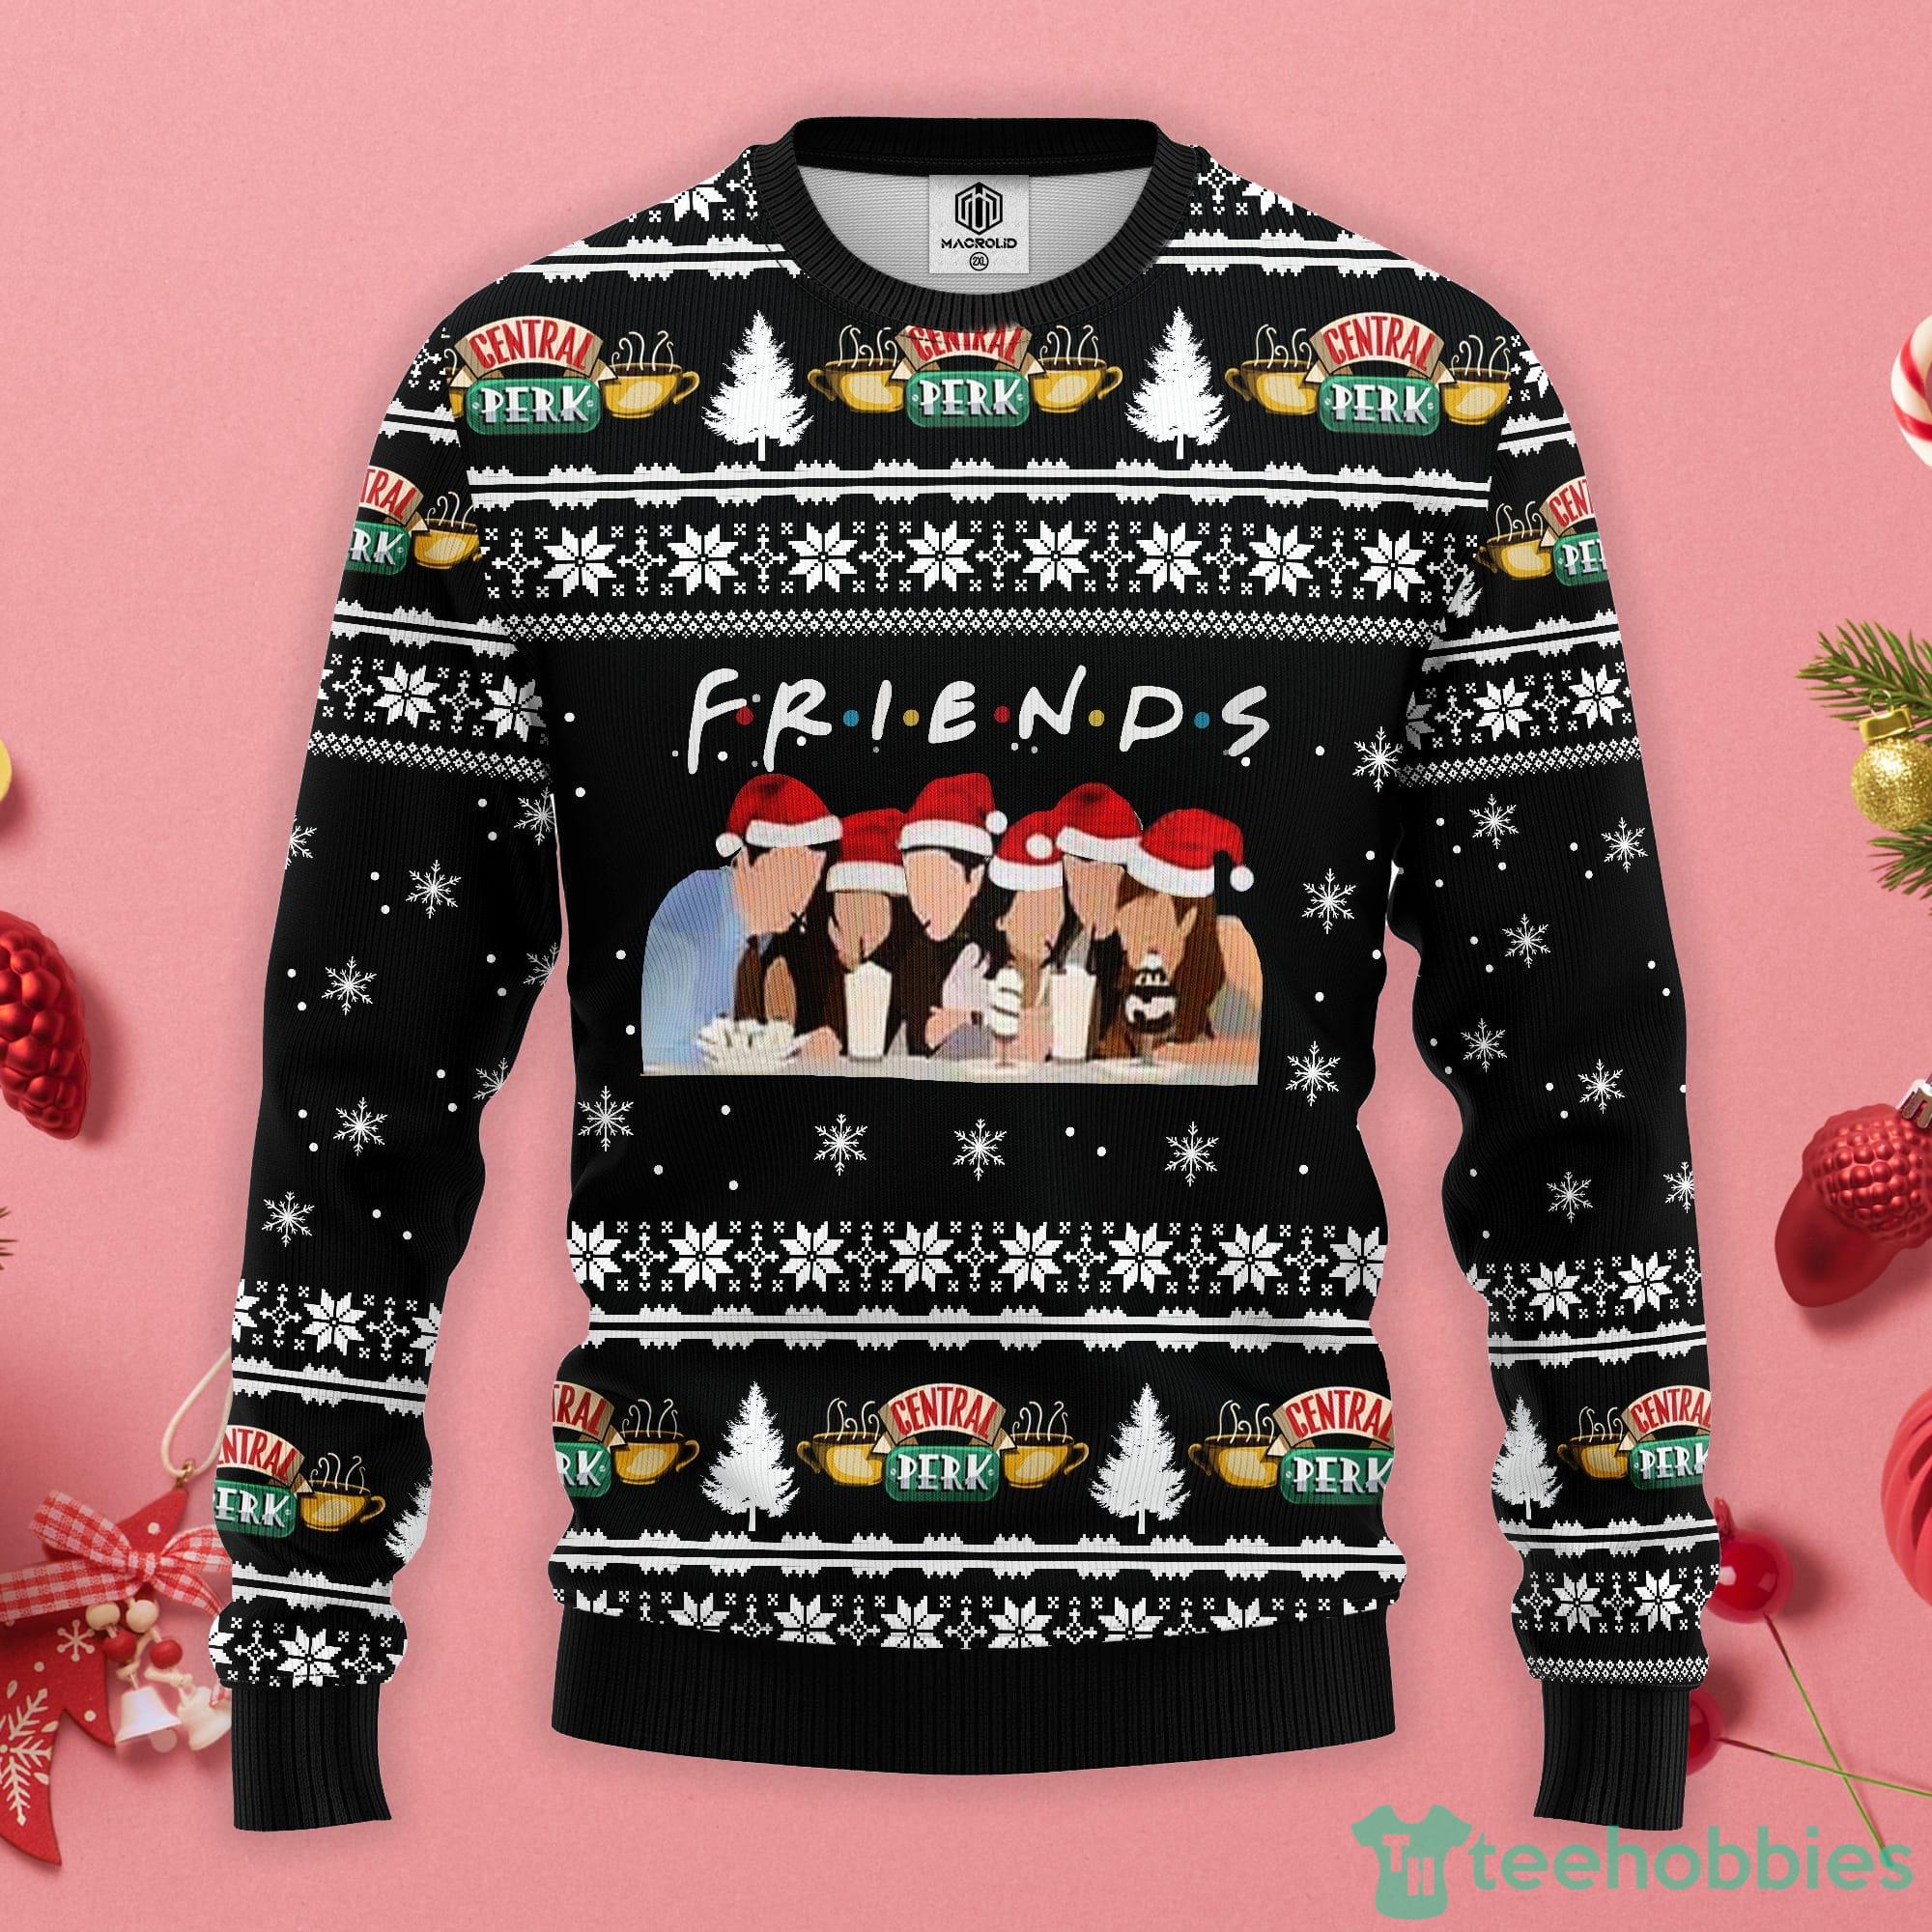 New Kids on the Block Band 3D All Over Printed Ugly Christmas Sweater  Christmas Gift For Family - Freedomdesign